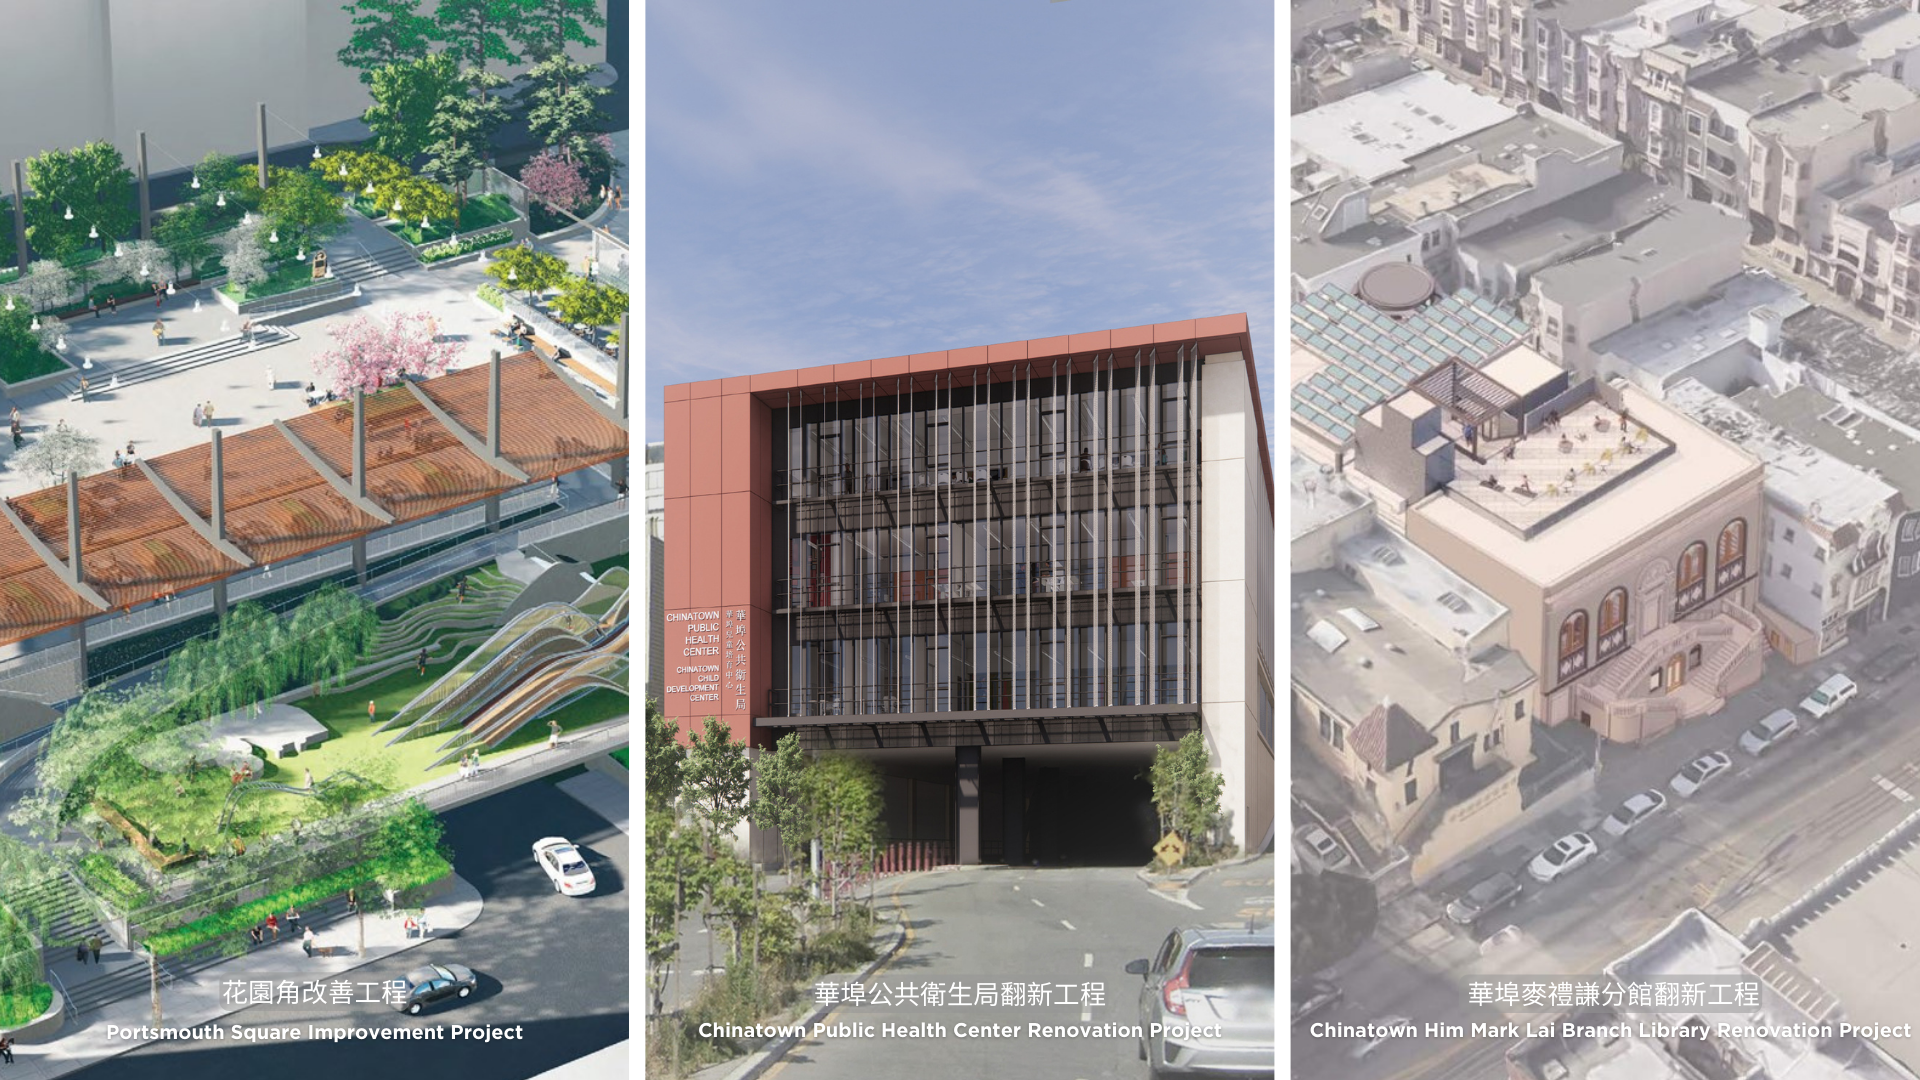 Chinatown Public Art Project Renderings: Portsmouth Square, Chinatown Public Health Center, and Chinatown Him Mark Lai Branch Library